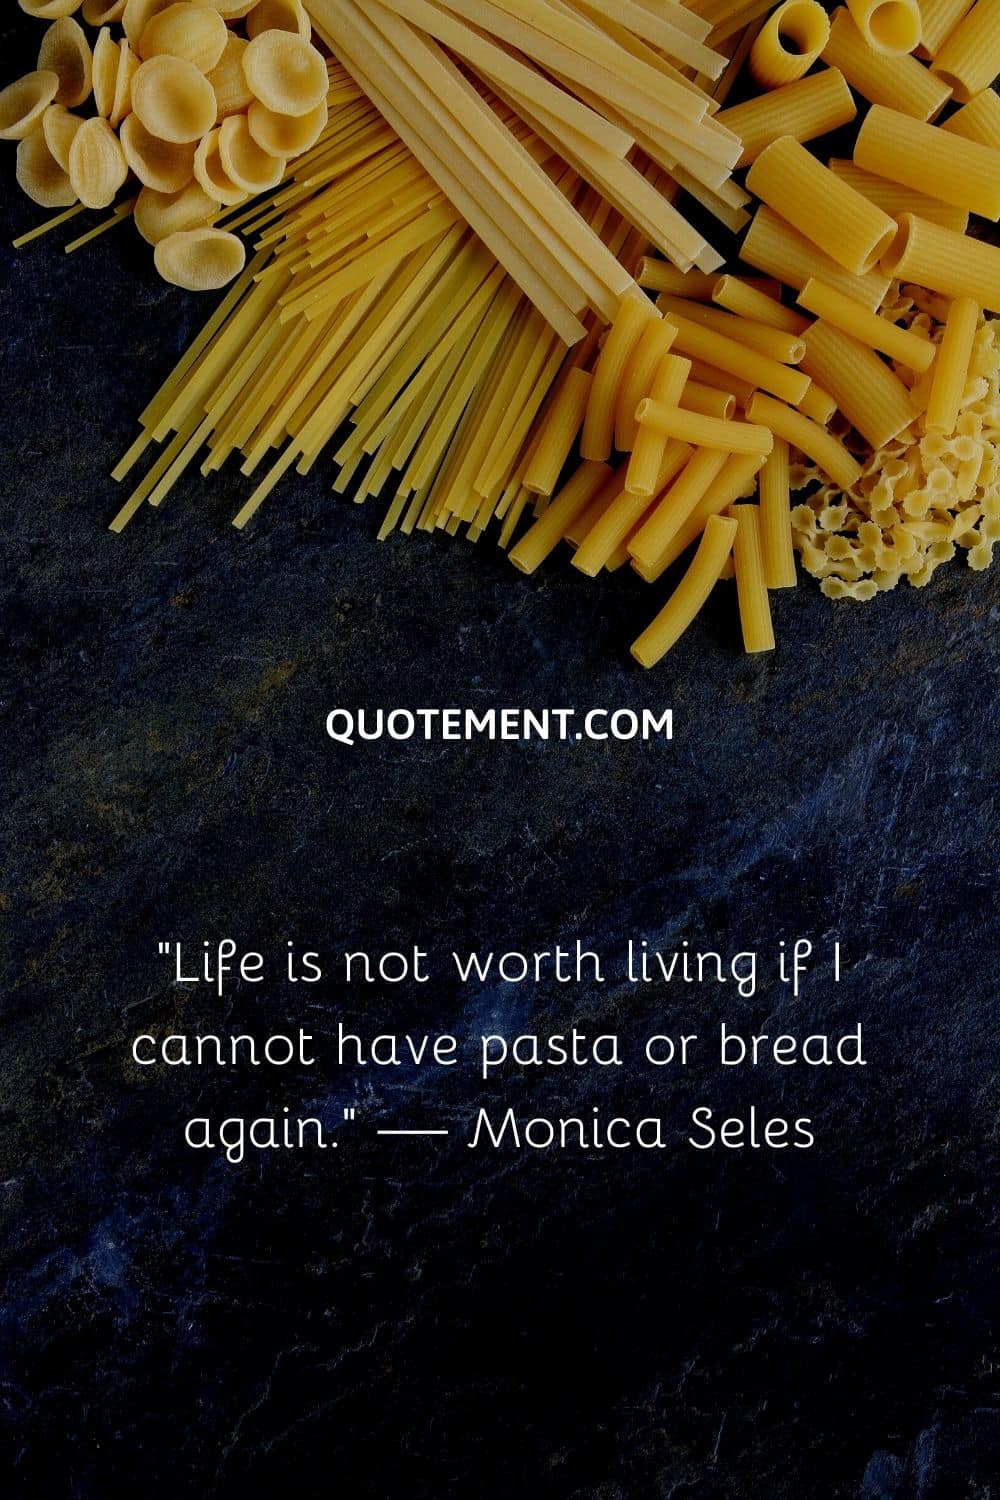 Life is not worth living if I cannot have pasta or bread again